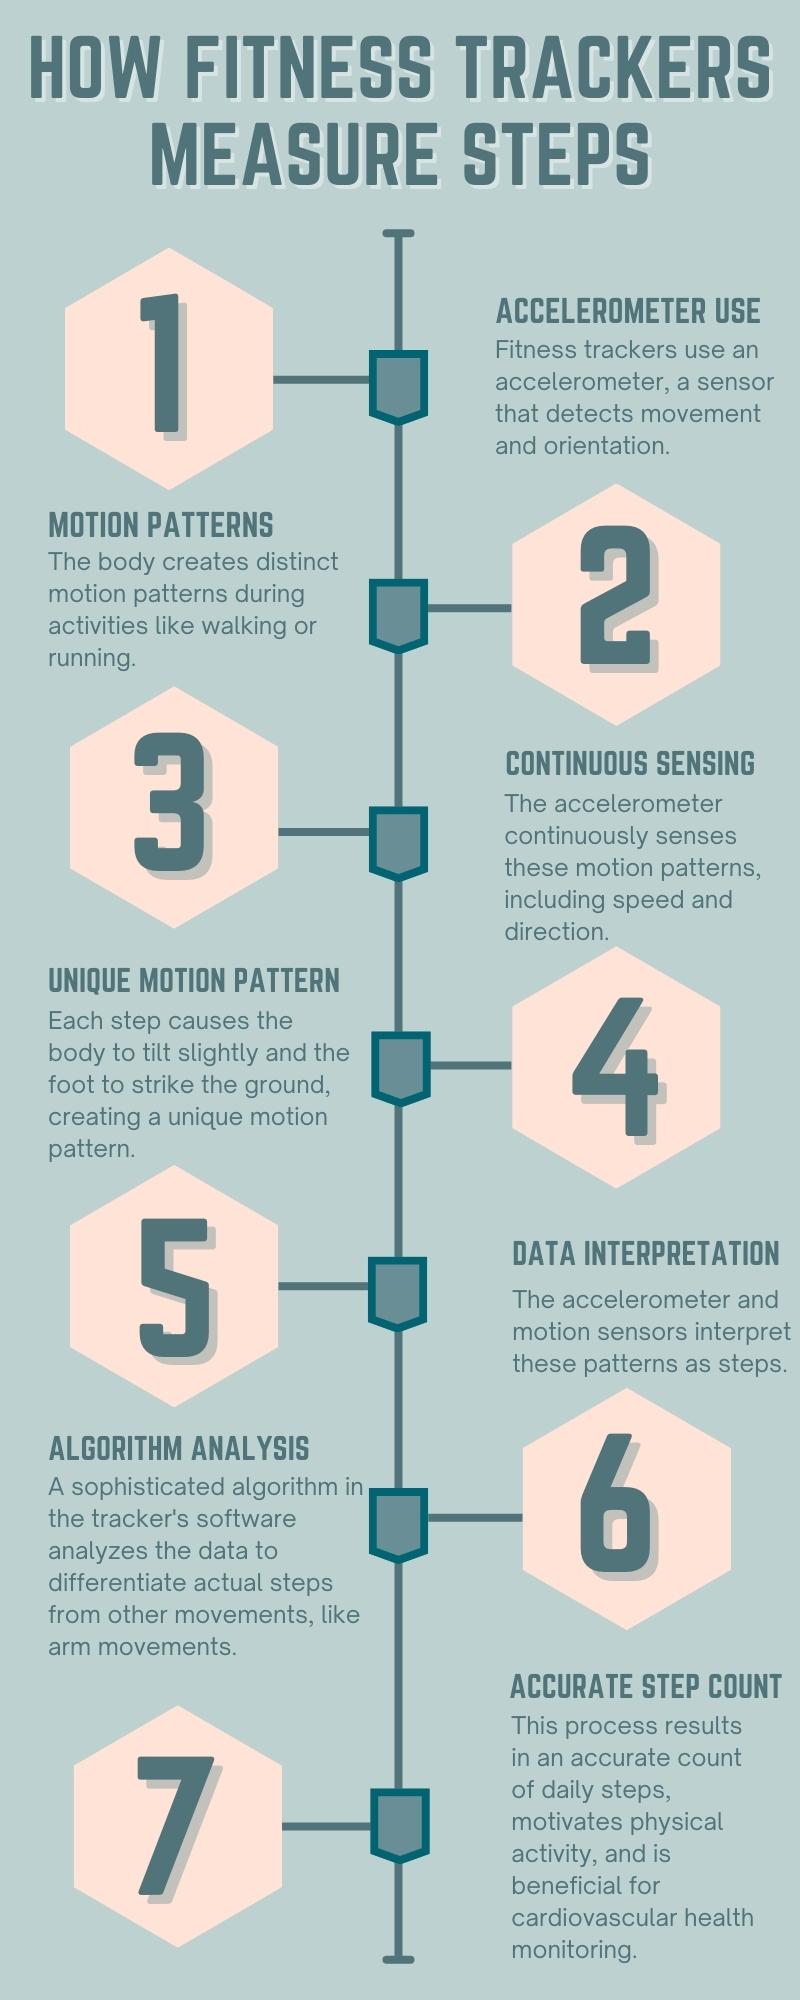 The infographic shows how fitness trackers measure steps. A fitness tracker measures steps primarily using an accelerometer, a small motion sensor that detects movement and orientation. When you walk or run, your body produces distinct motion patterns.